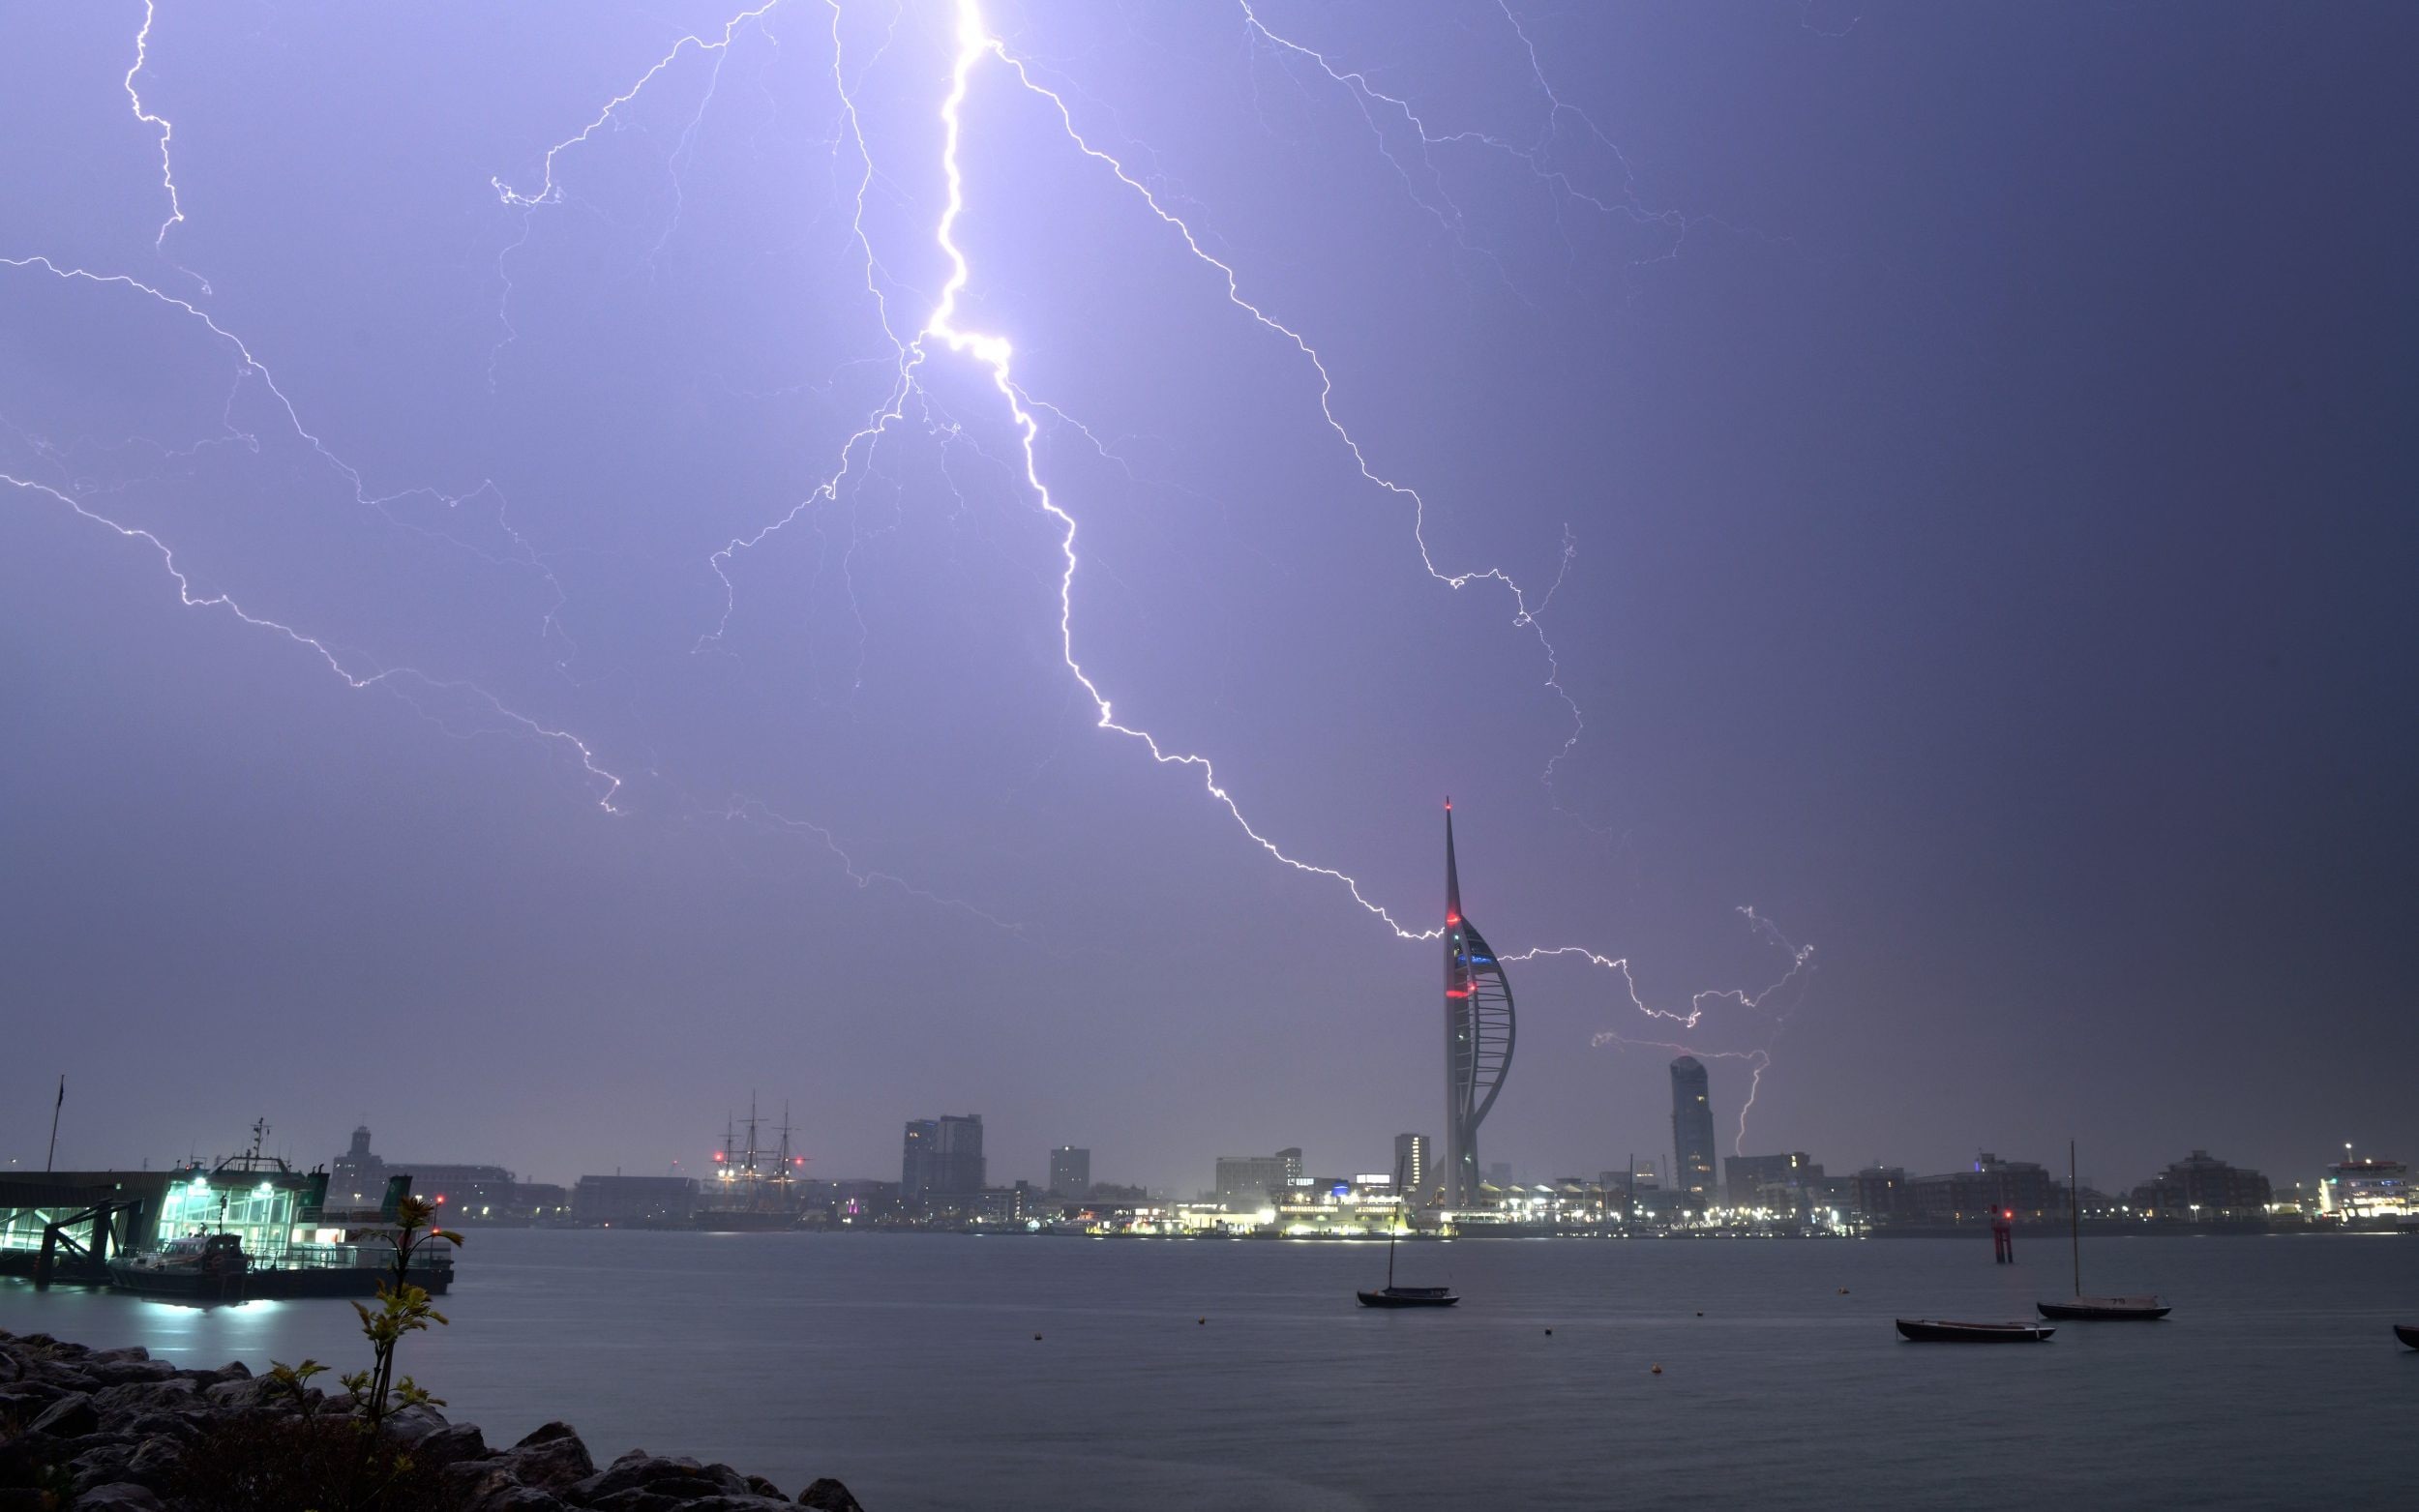 trains delayed after spectacular lightning storms cut power